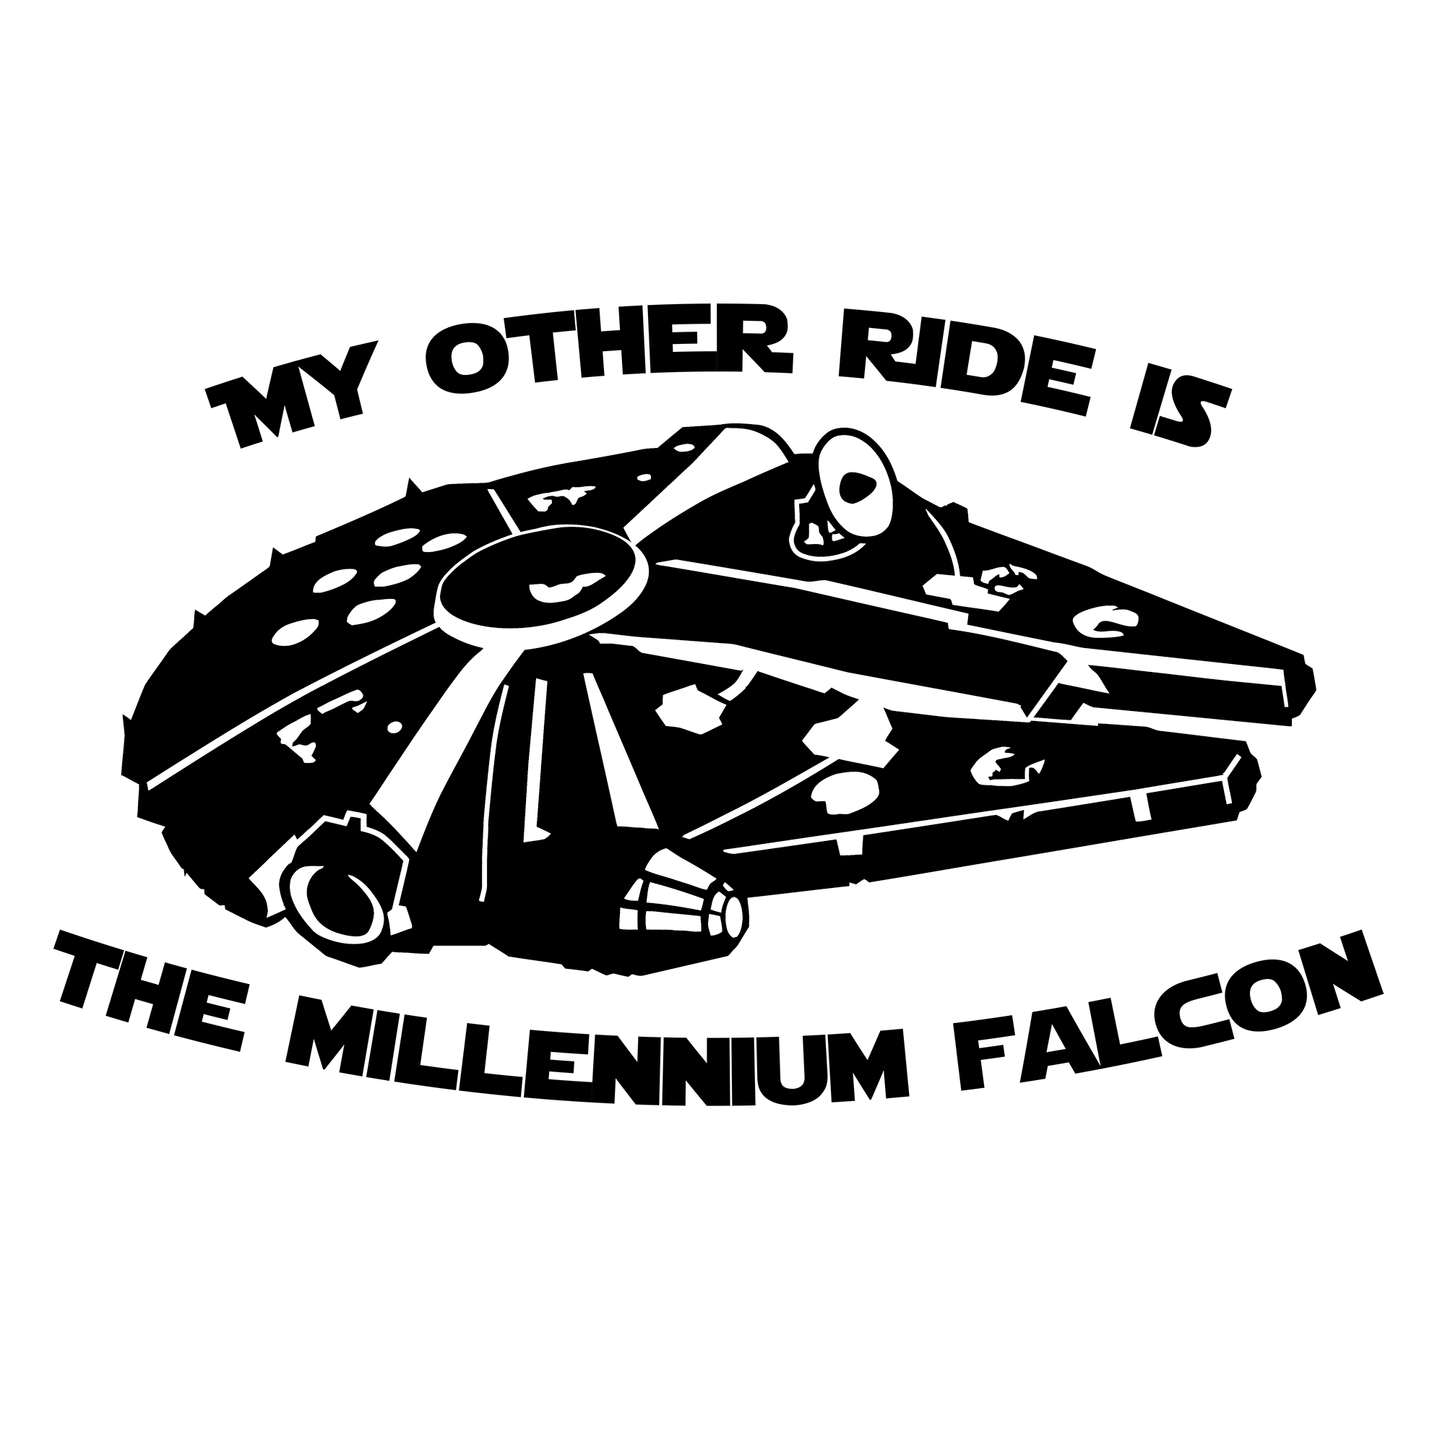 Star Wars My Other Ride Is The Millennium Falcon Vinyl Decal Sticker